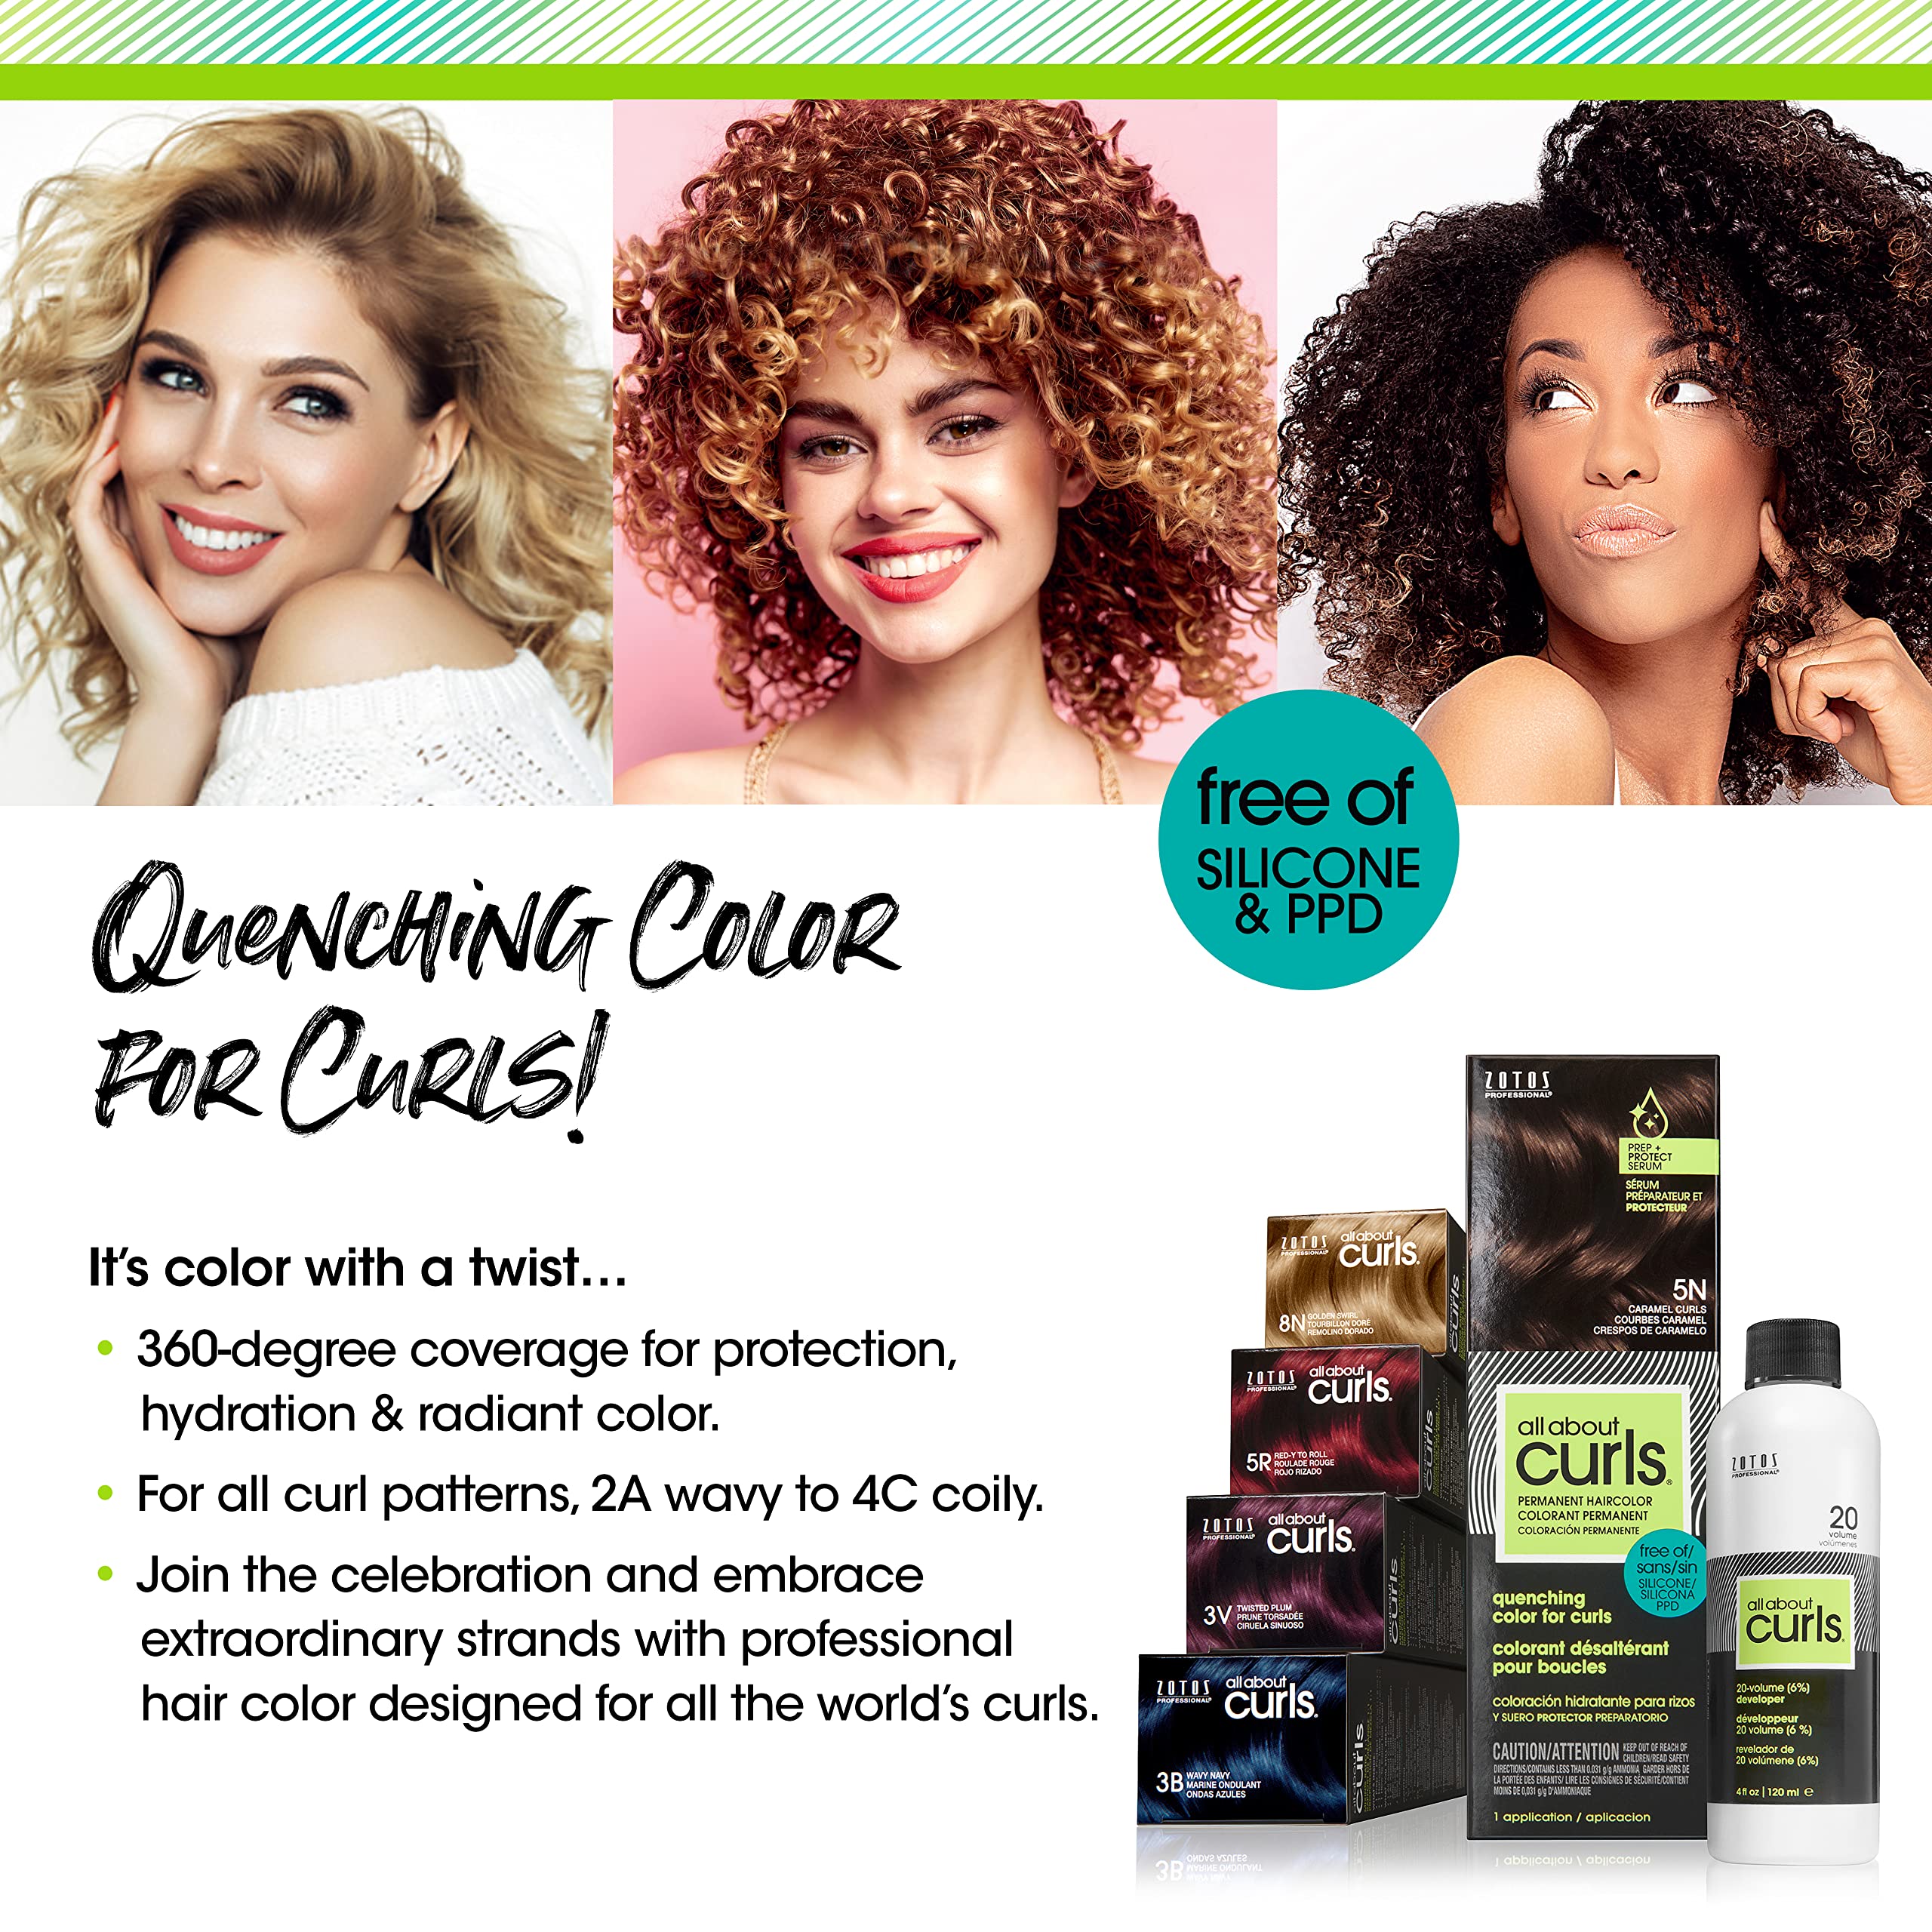 All About Curls 20 Volume Creme Developer | For Hair Coloring & Long Lasting Color | All Curly Hair Types